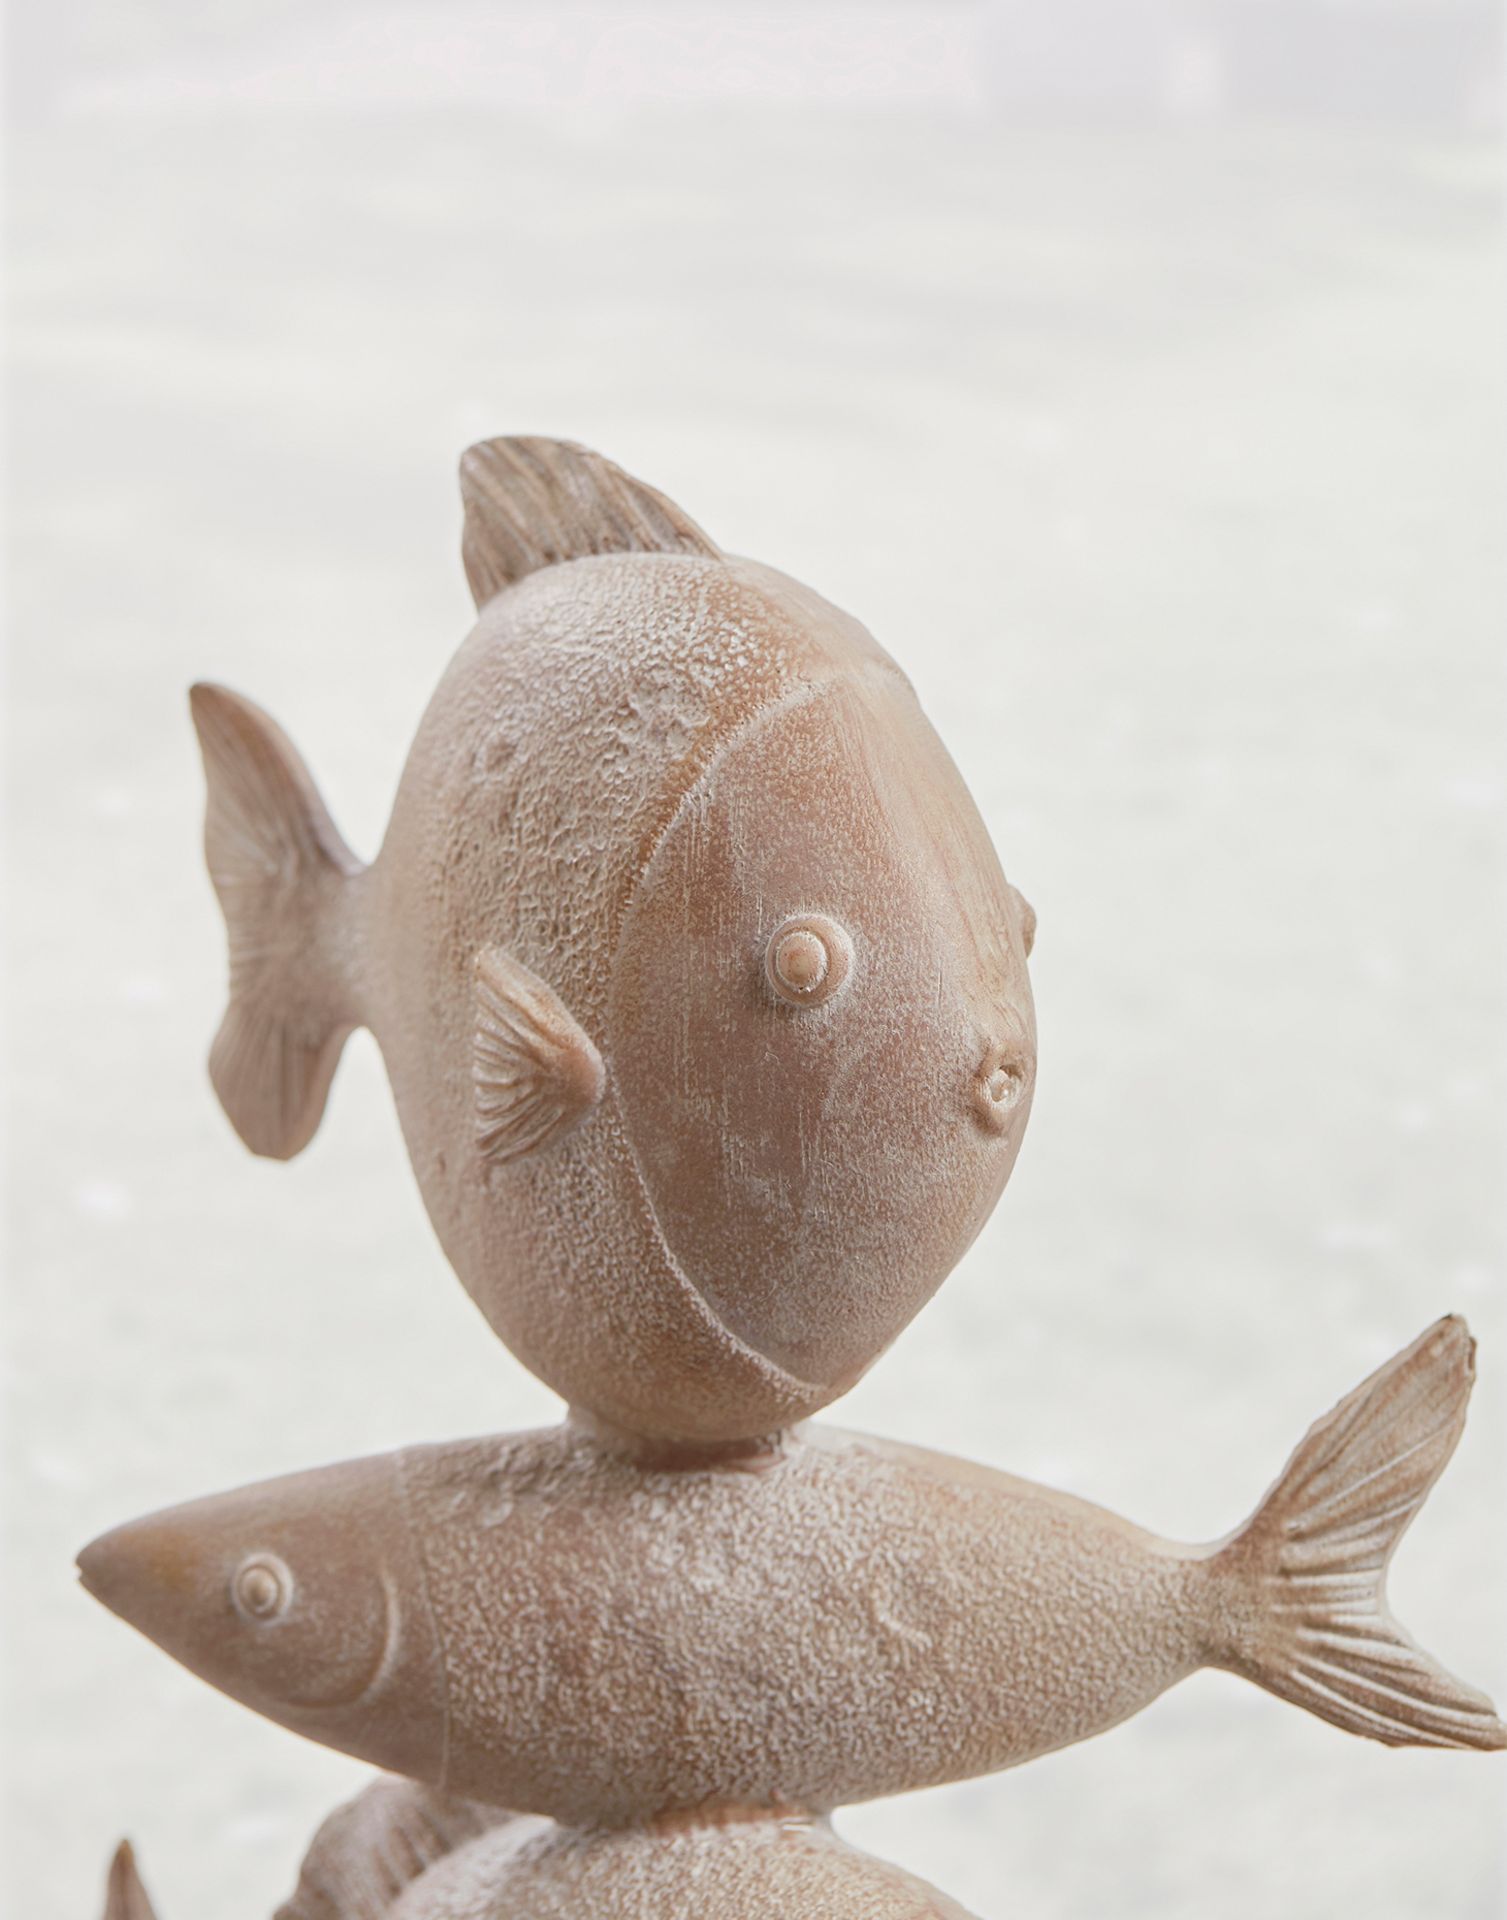 Cox & Cox Fish Totem Ornament. RRP £50.00. The brown washed finish of this lively fish ornament - Image 2 of 2